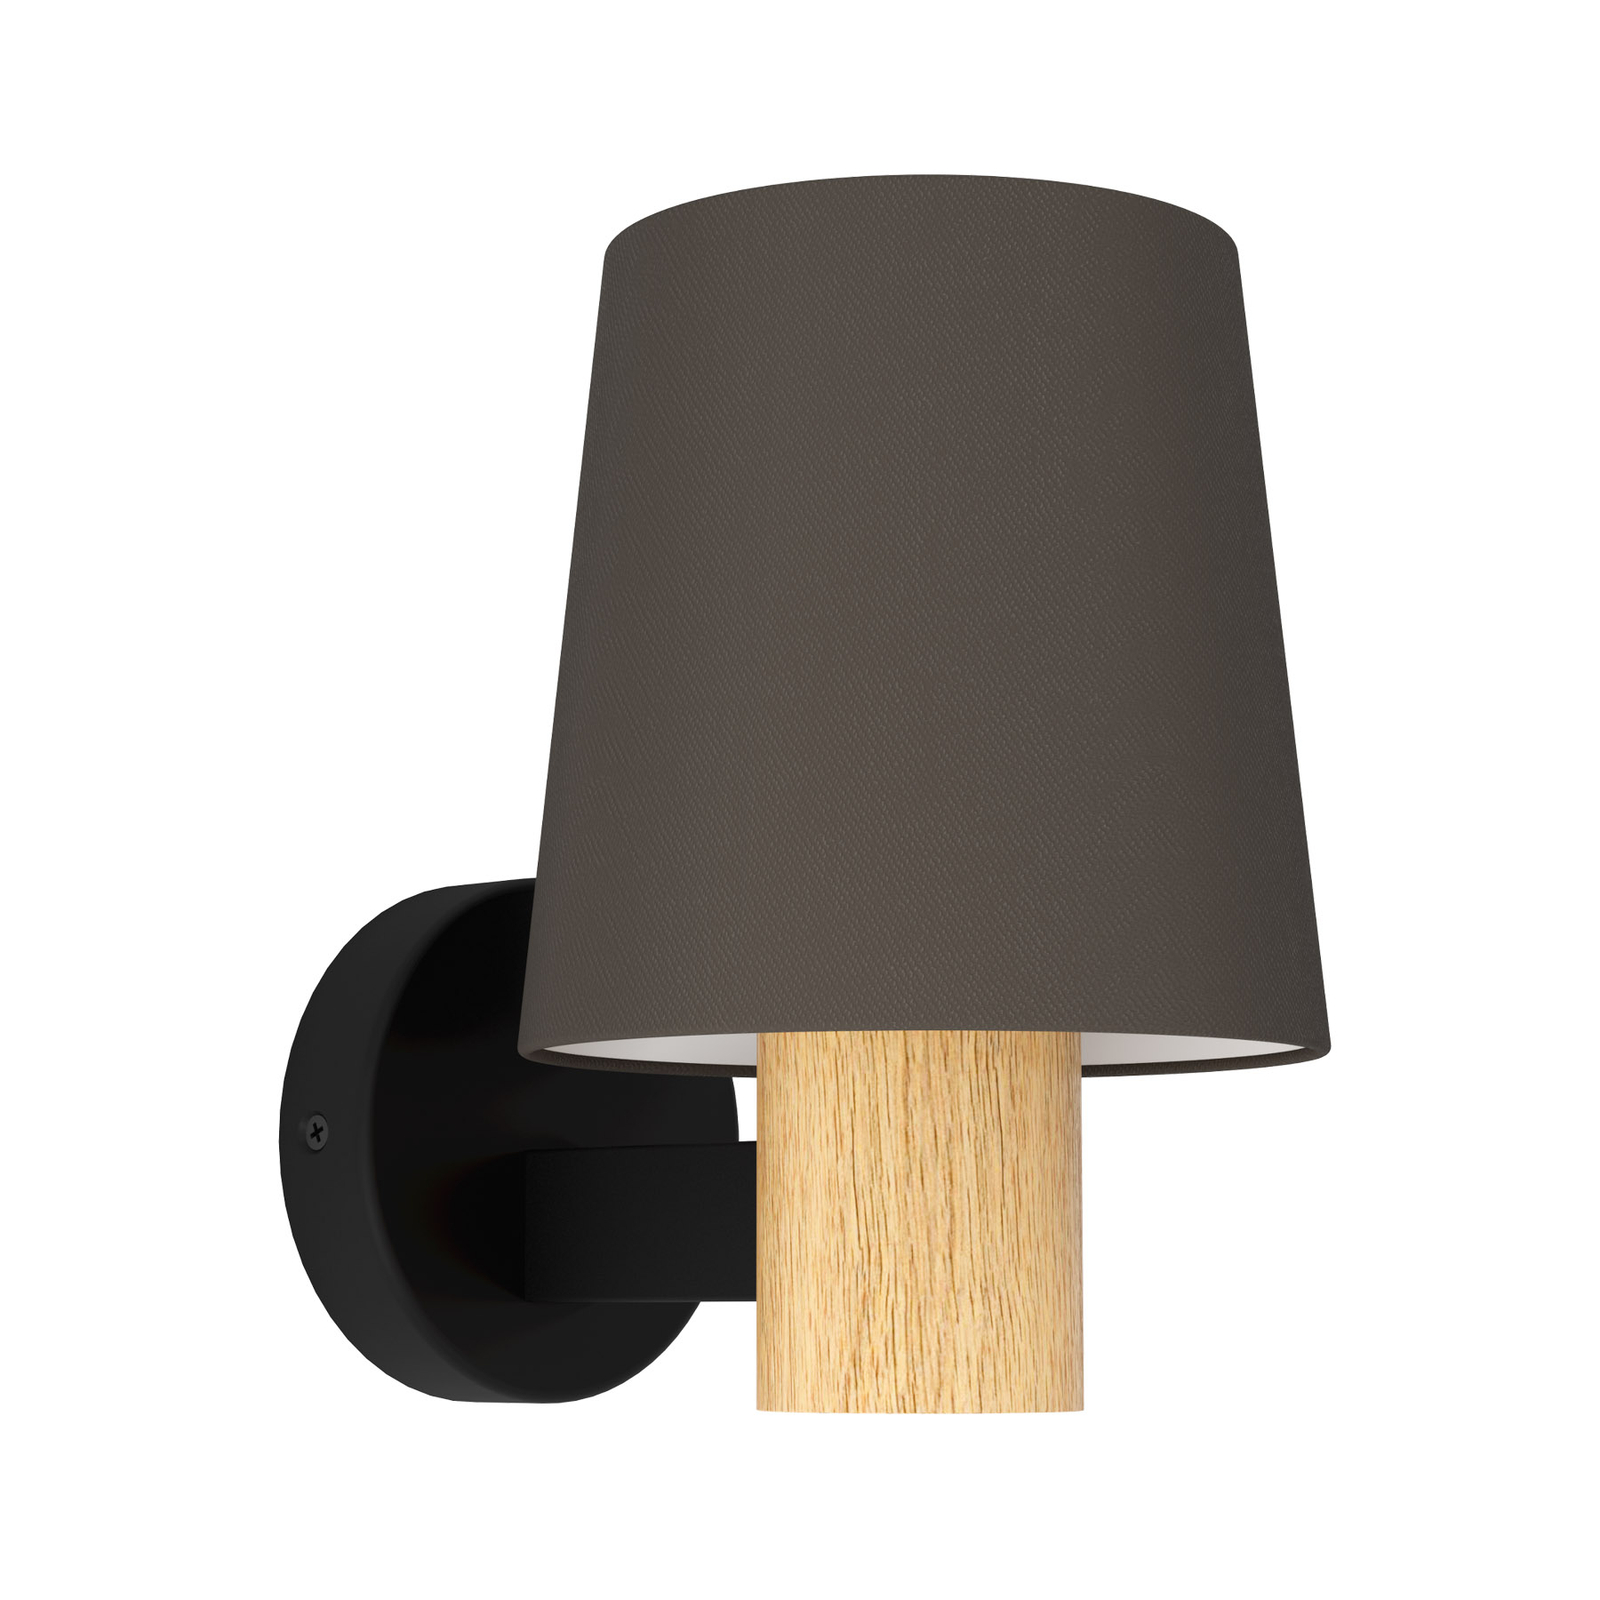 Edale wall lamp fabric lampshade cappuccino